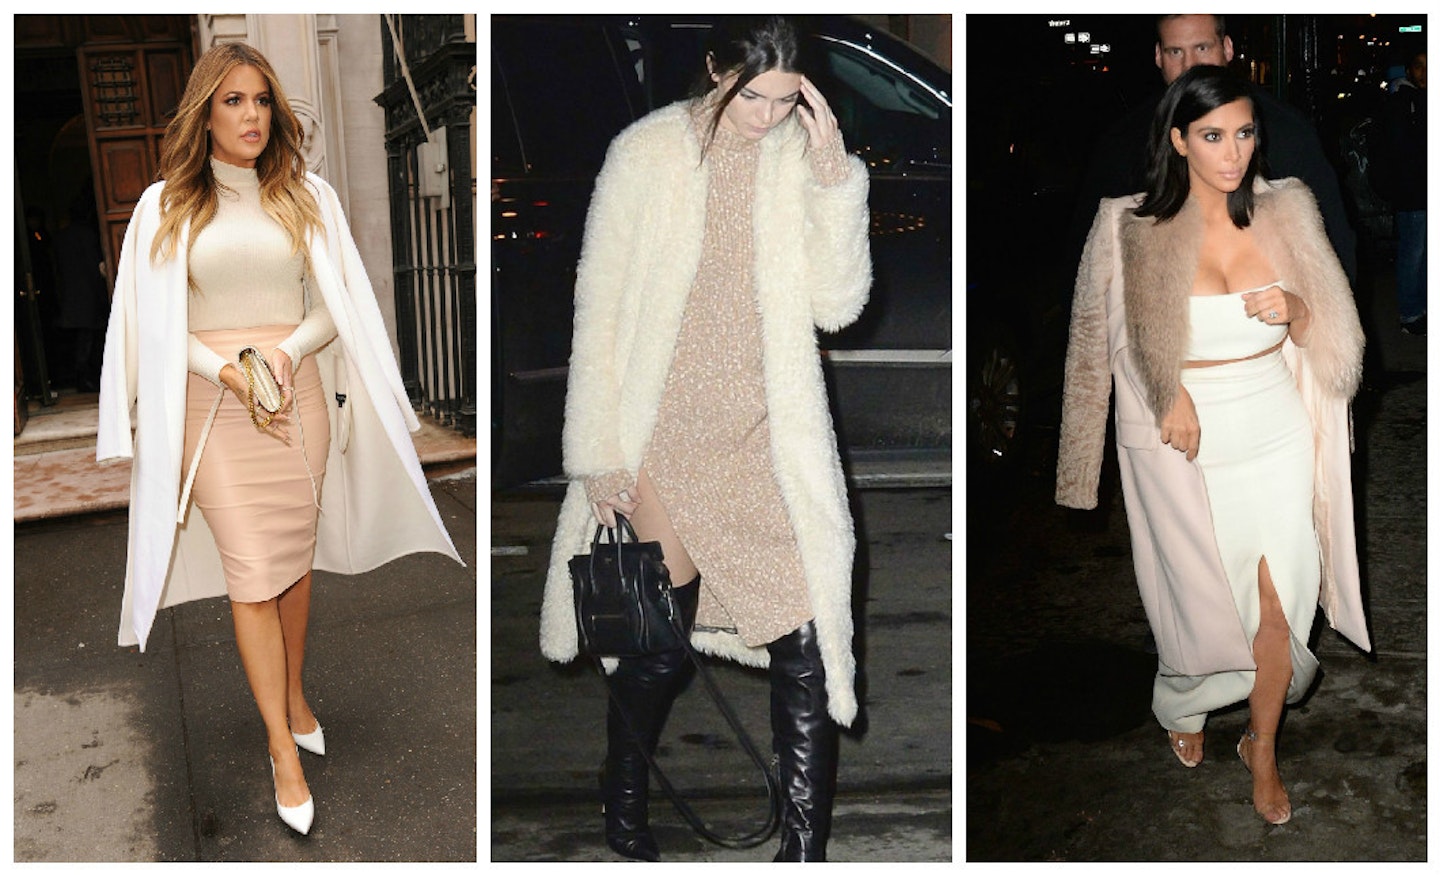 Khloe, Kendall and Kim go matchy-matchy - Getty